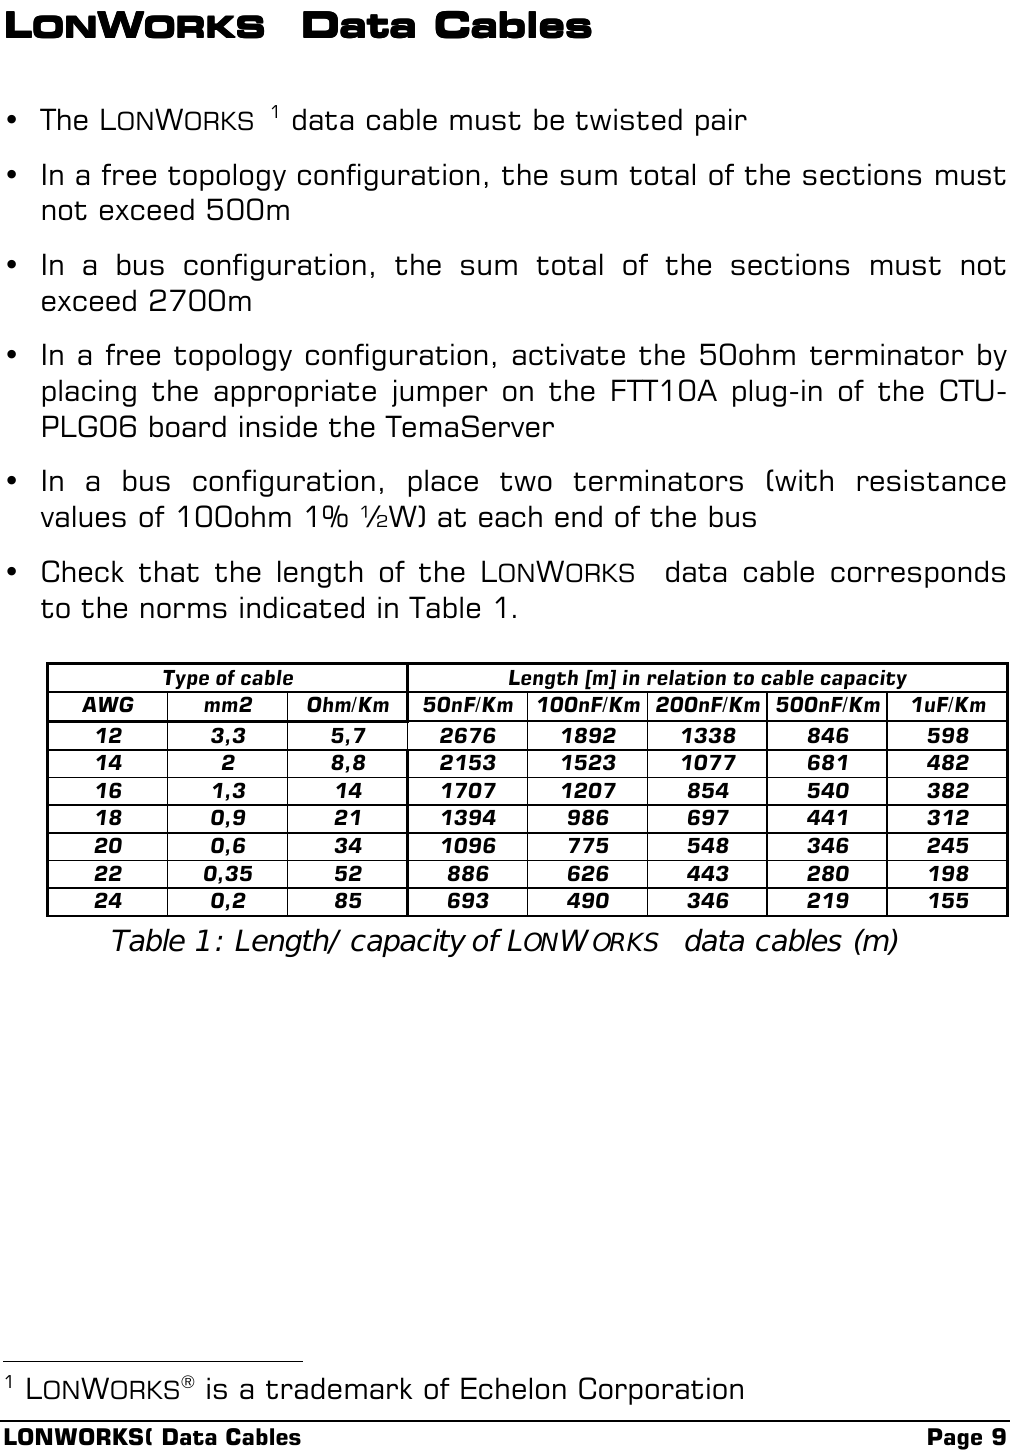 LONWORKS( Data Cables Page 9LLLLONONONONWWWWORKSORKSORKSORKS  Data Cables Data Cables Data Cables Data Cables• The LONWORKS 1 data cable must be twisted pair• In a free topology configuration, the sum total of the sections mustnot exceed 500m• In a bus configuration, the sum total of the sections must notexceed 2700m• In a free topology configuration, activate the 50ohm terminator byplacing the appropriate jumper on the FTT10A plug-in of the CTU-PLG06 board inside the TemaServer• In a bus configuration, place two terminators (with resistancevalues of 100ohm 1% ½W) at each end of the bus• Check that the length of the LONWORKS  data cable correspondsto the norms indicated in Table 1.Type of cable Length [m] in relation to cable capacityAWG mm2 Ohm/Km 50nF/Km 100nF/Km 200nF/Km 500nF/Km 1uF/Km12 3,3 5,7 2676 1892 1338 846 59814 2 8,8 2153 1523 1077 681 48216 1,3 14 1707 1207 854 540 38218 0,9 21 1394 986 697 441 31220 0,6 34 1096 775 548 346 24522 0,35 52 886 626 443 280 19824 0,2 85 693 490 346 219 155Table 1: Length/capacity of LONWORKS  data cables (m)                                                           1 LONWORKS® is a trademark of Echelon Corporation